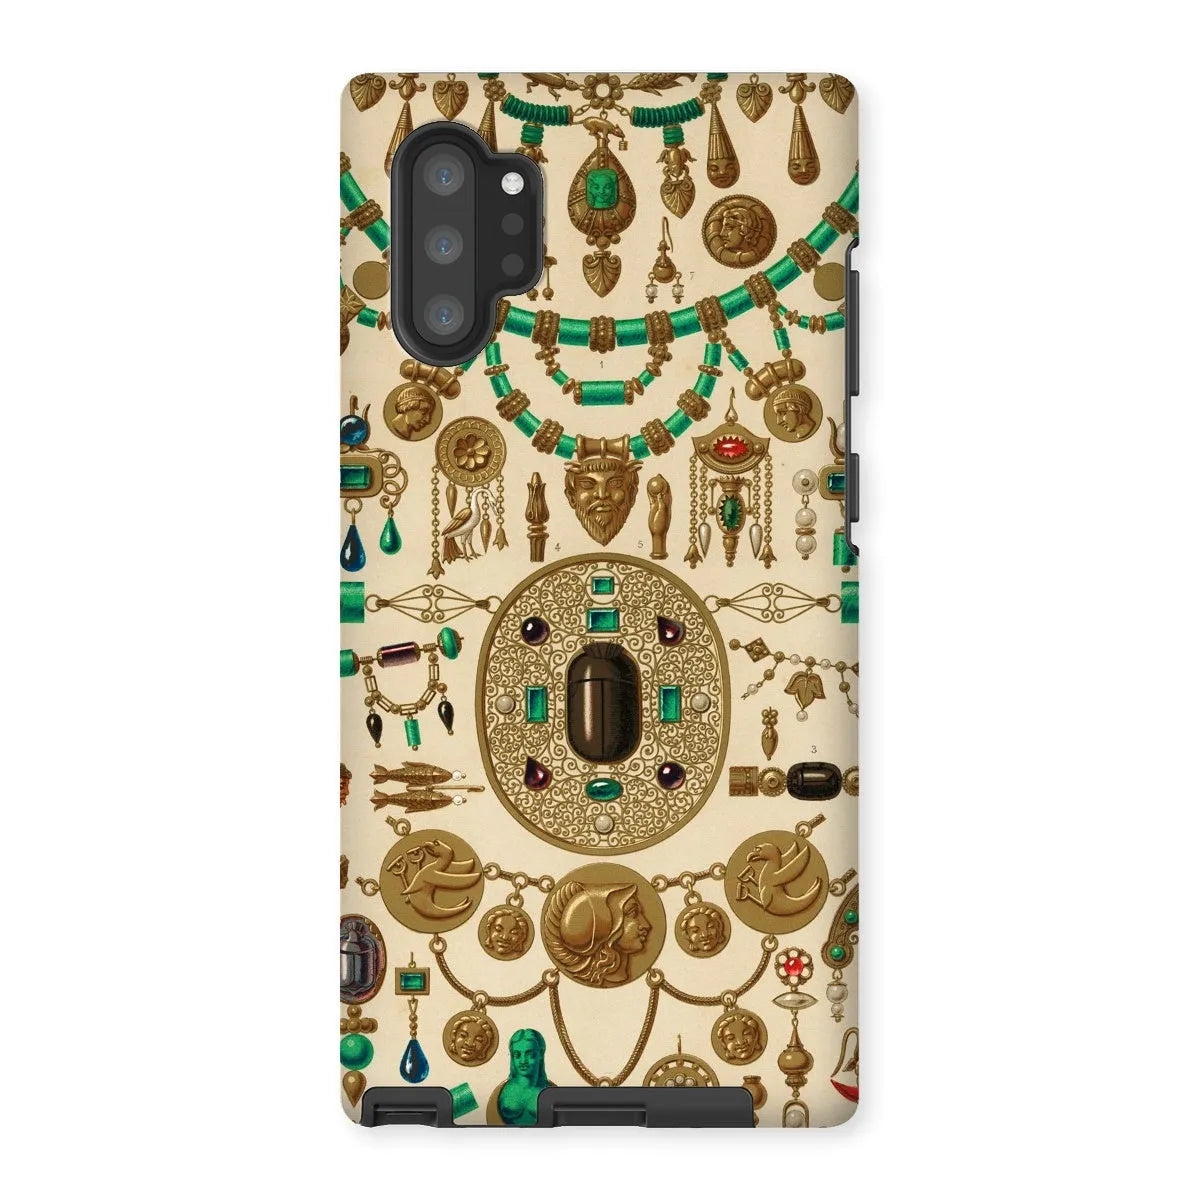 Etruscan Jewelry By Auguste Racinet Art Phone Case - Samsung Galaxy Note 10p / Matte - Mobile Phone Cases - Aesthetic